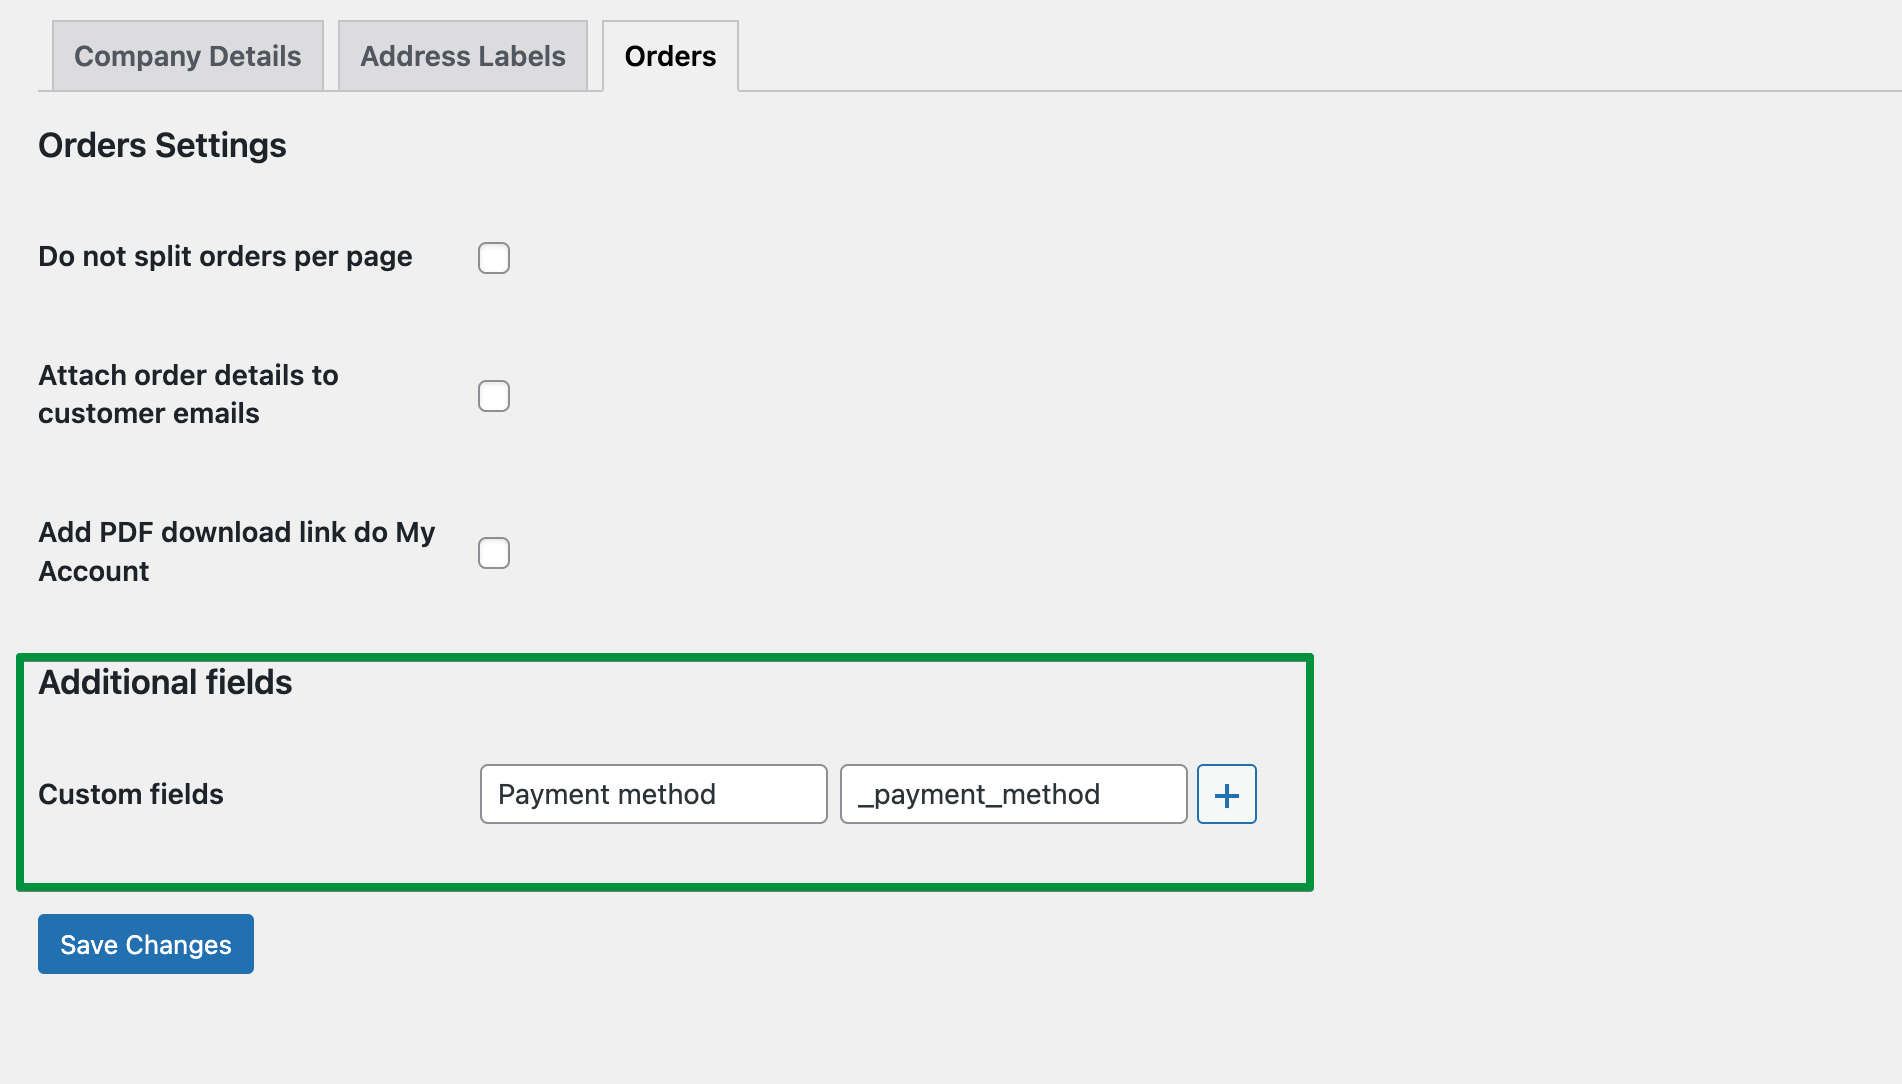 Add custom field to the order details